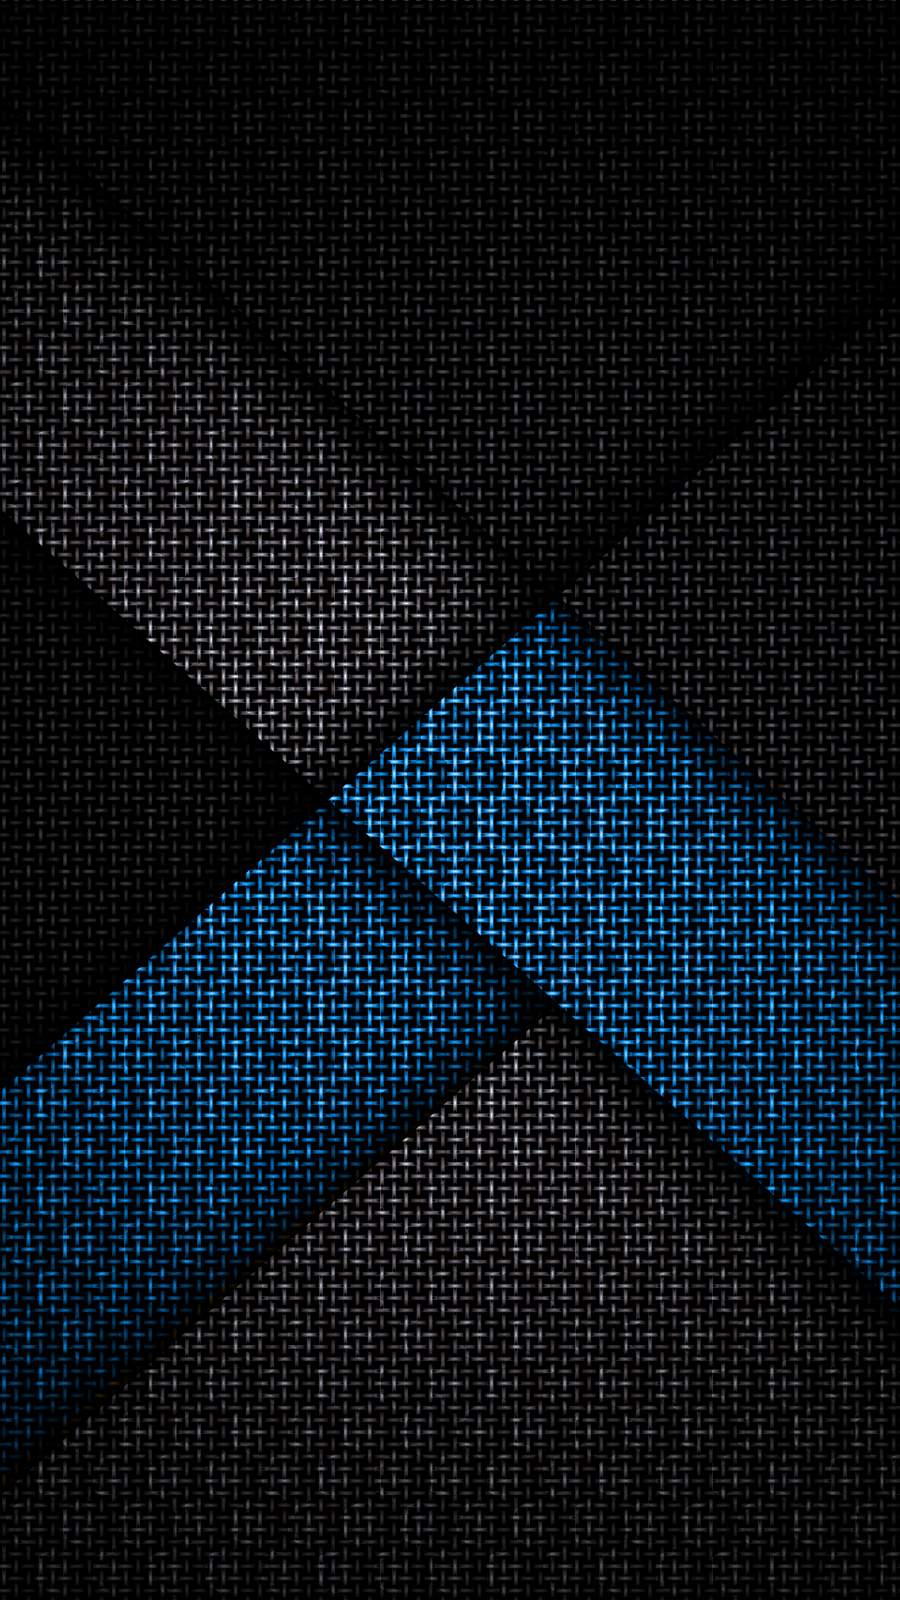 Abstract Texture IPhone Wallpaper   IPhone Wallpapers iPhone